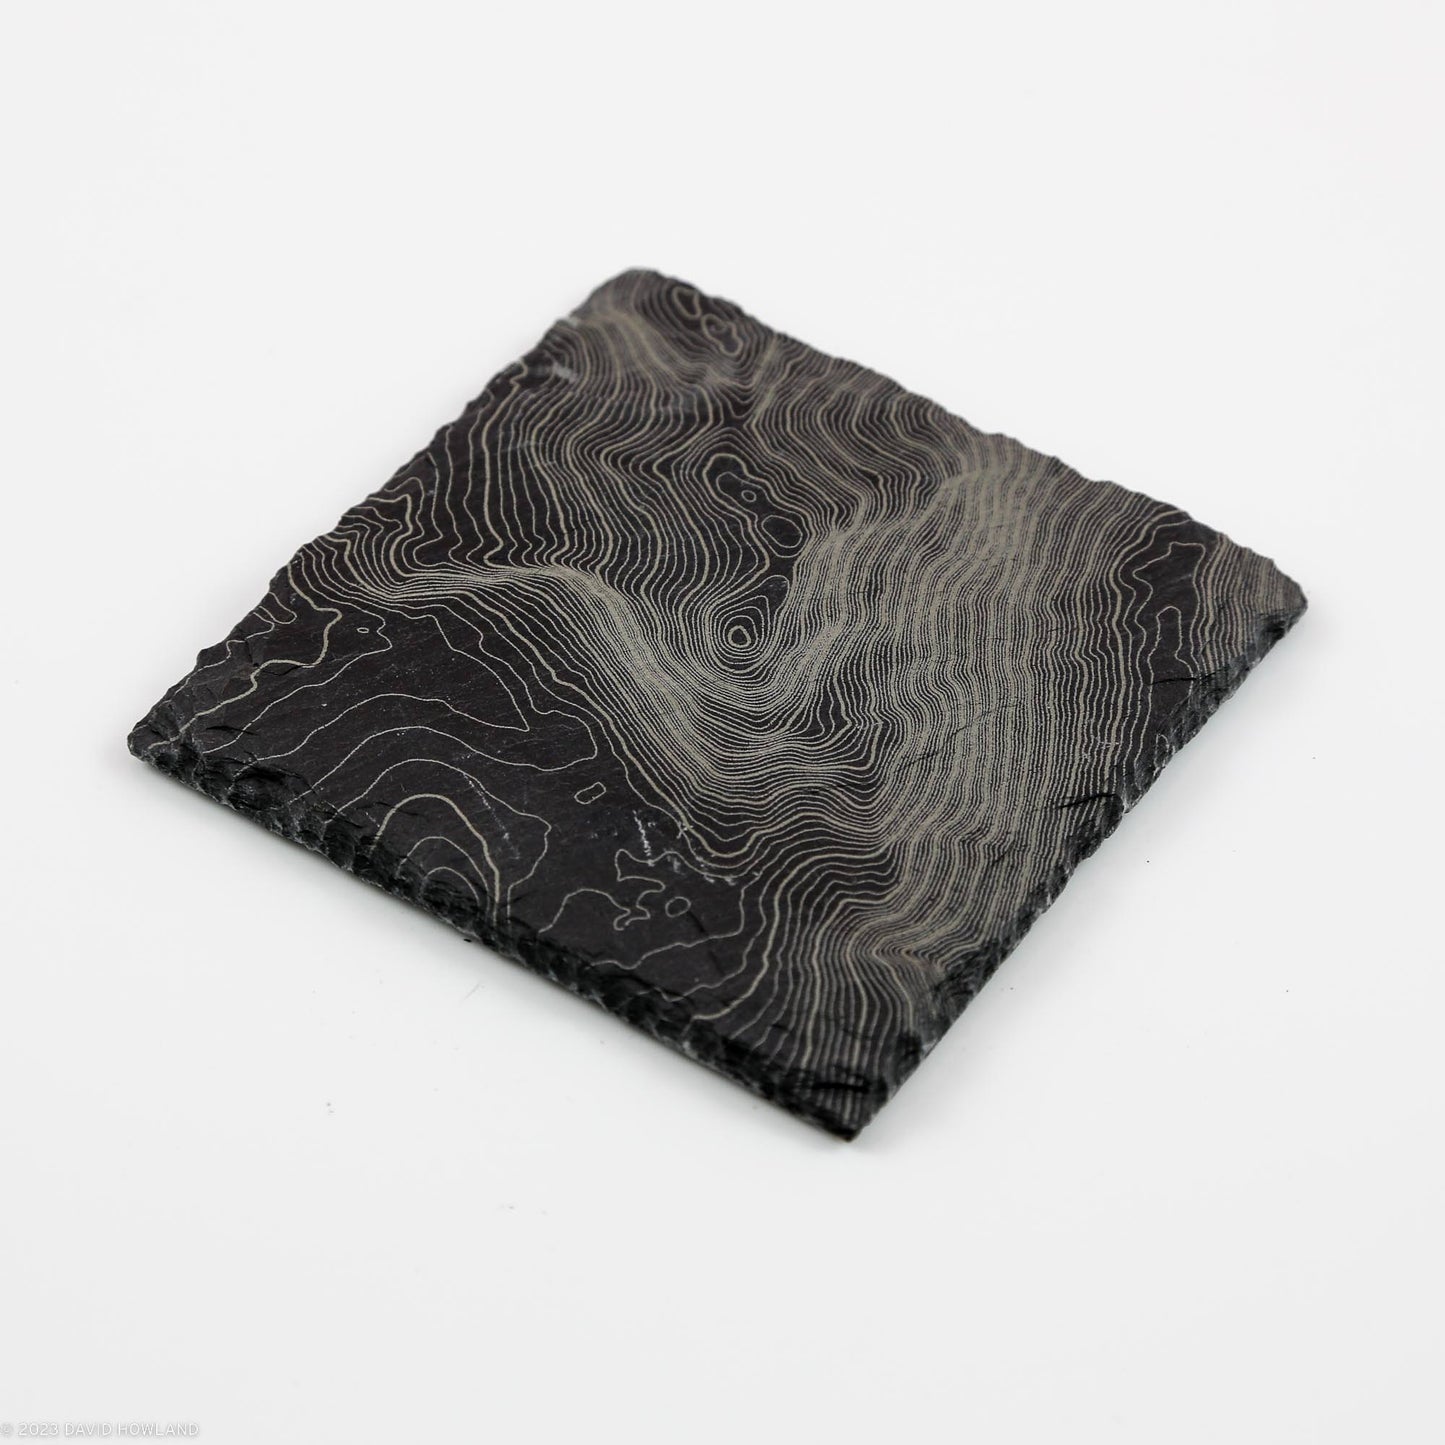 Mount Willey Topographic Map Slate Coaster